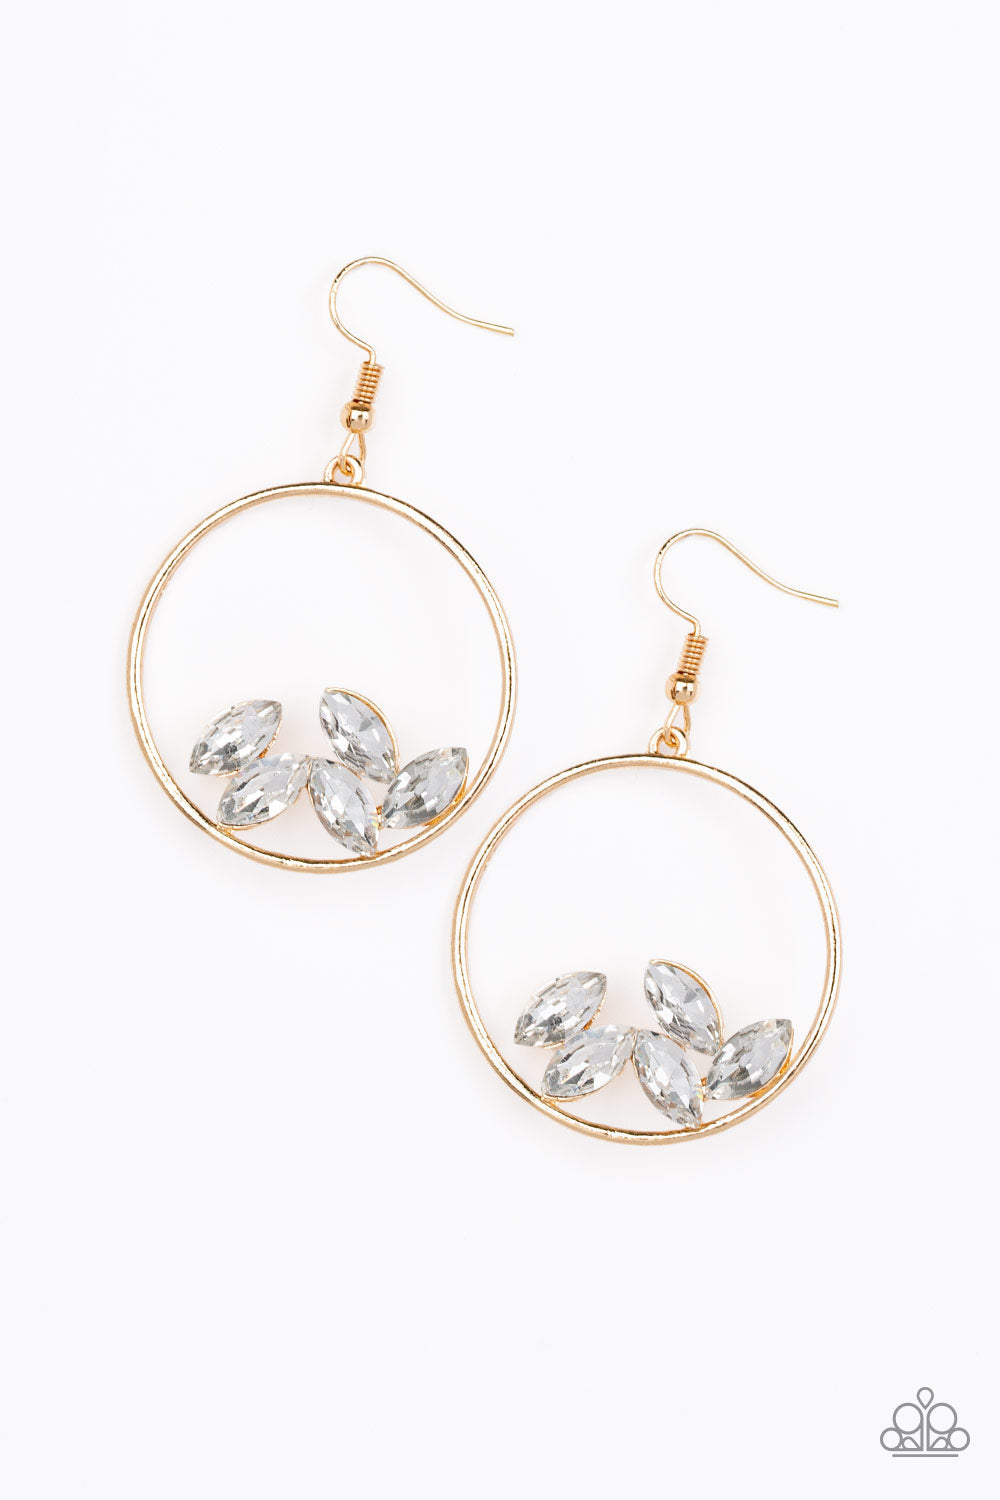 Cue The Confetti Gold Earring - Paparazzi Accessories  Glittery white marquise-cut rhinestones collect at the bottom of an airy gold hoop for a glamorous look. Earring attaches to standard fishhook fitting.  All Paparazzi Accessories are lead free and nickel free!  Sold as one pair of earrings.